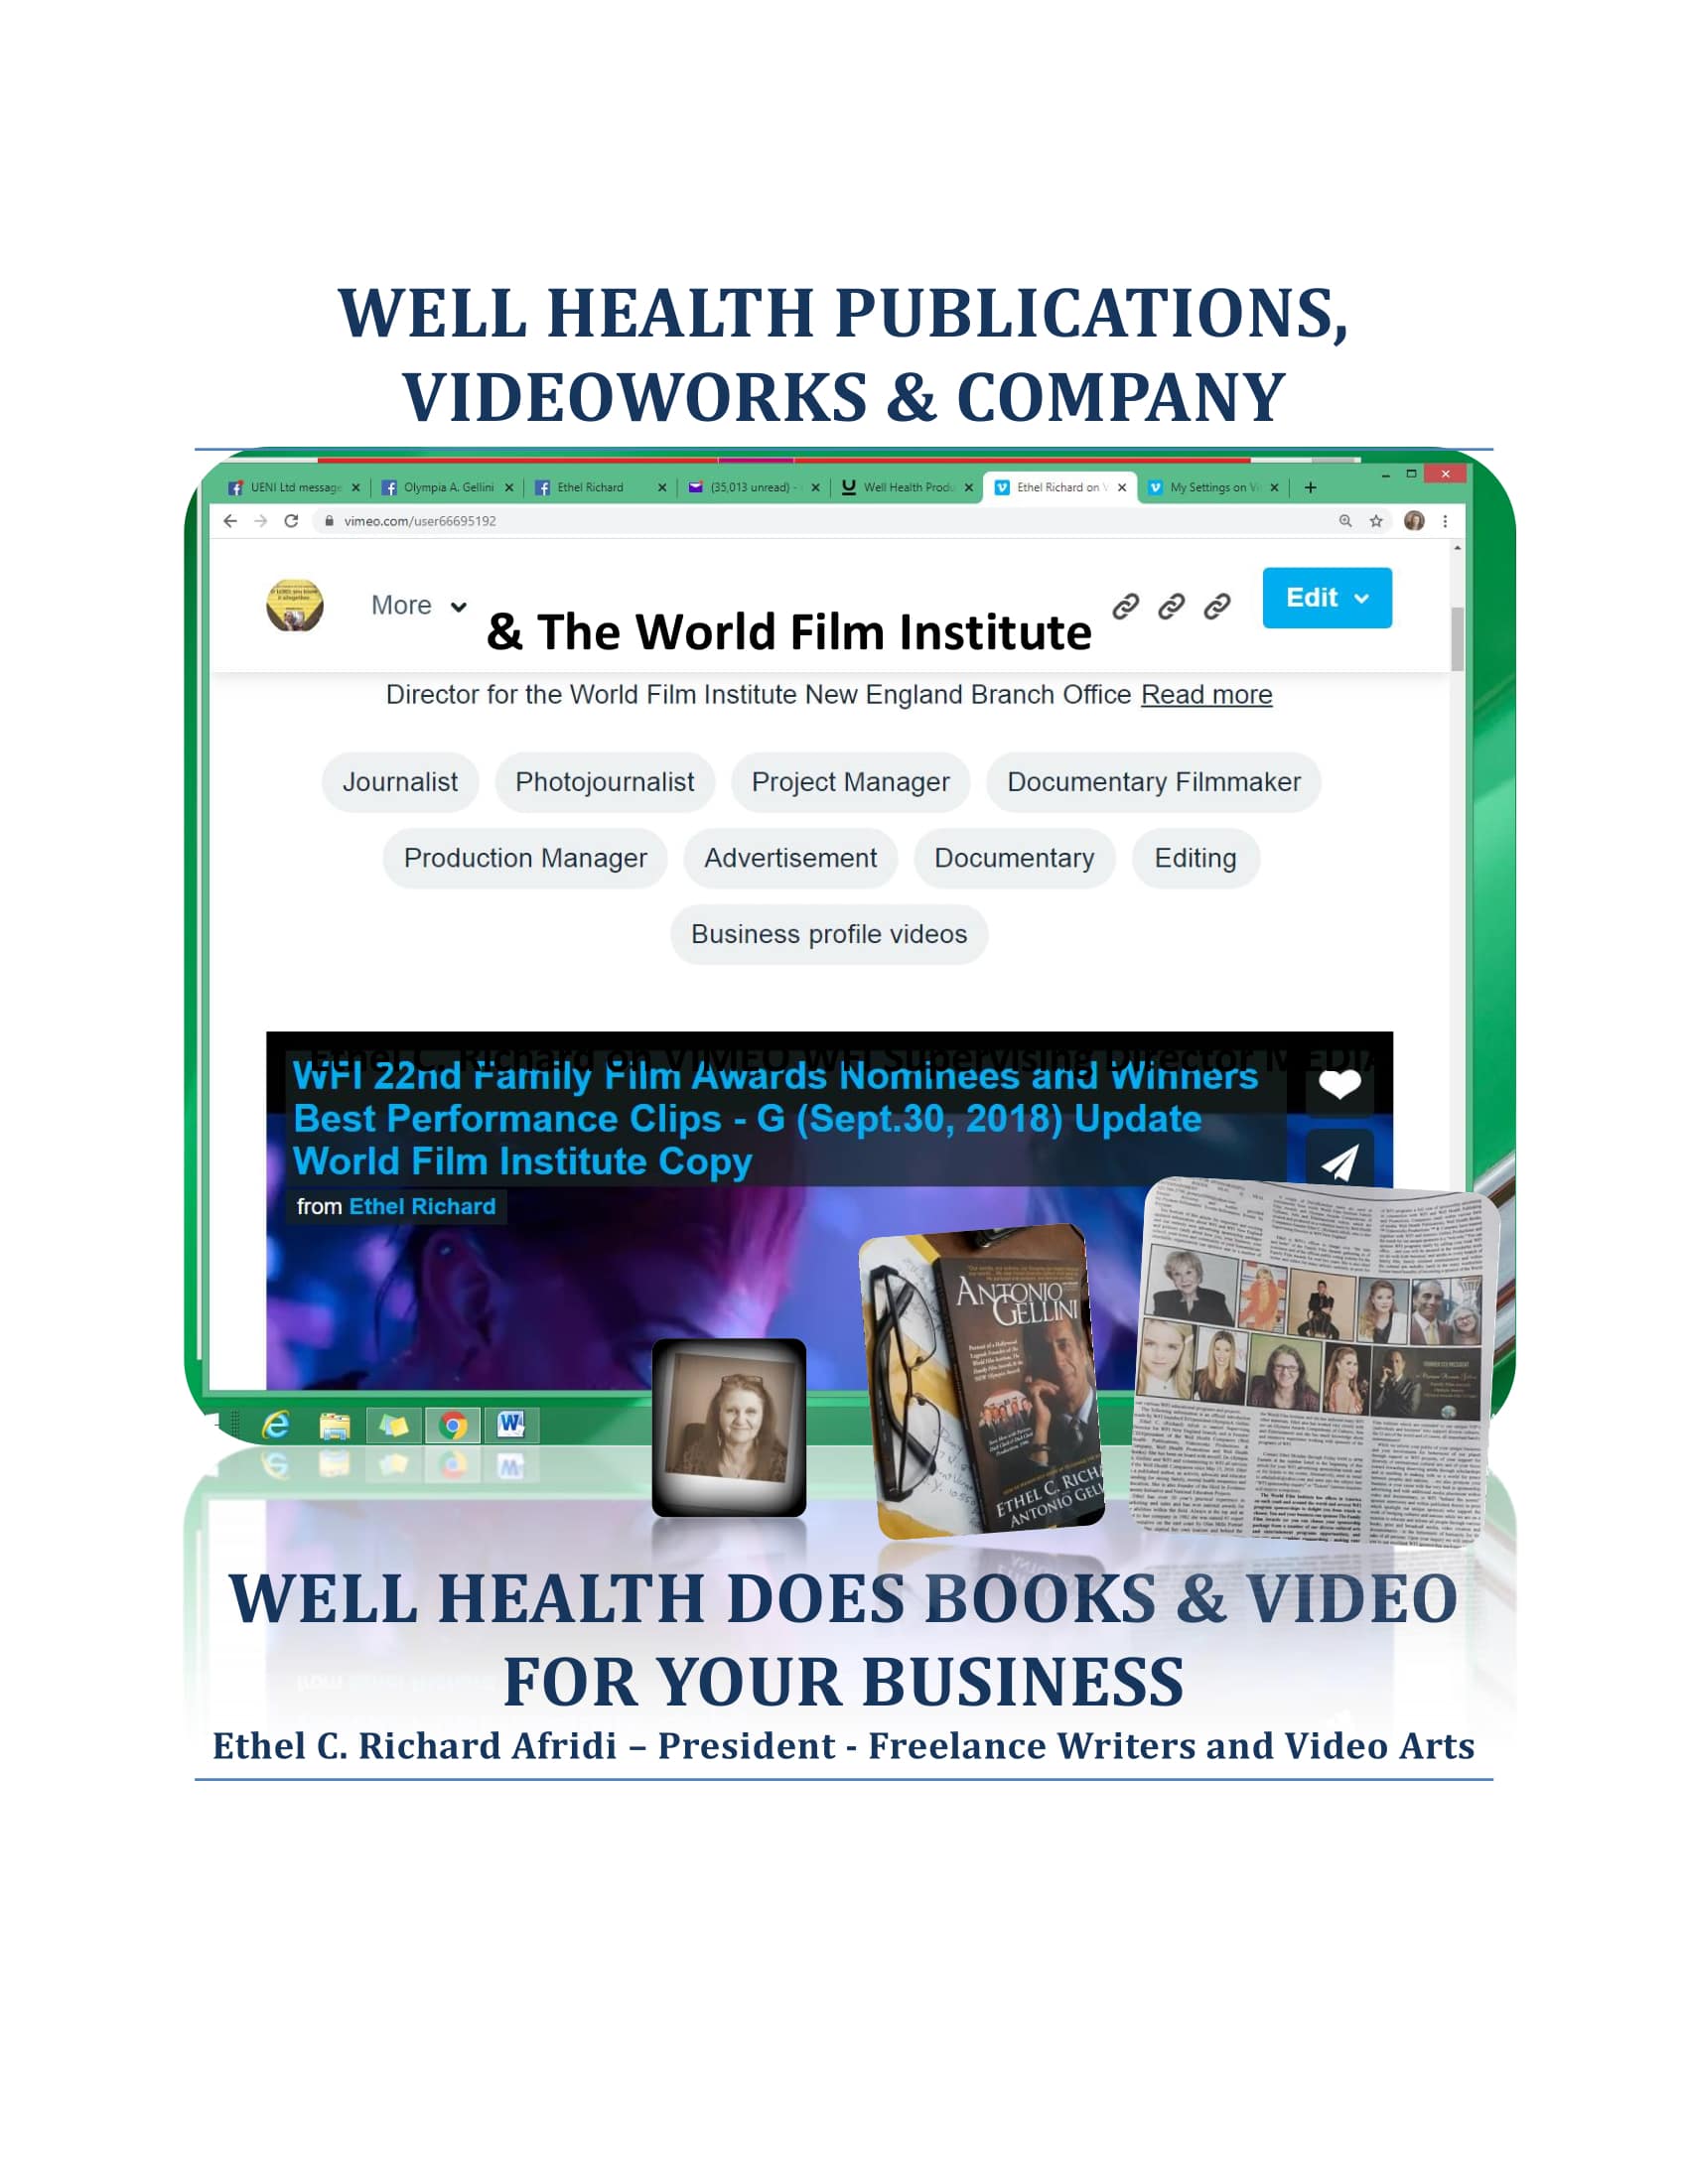 Well Health Publications & Videoworks Productions Company